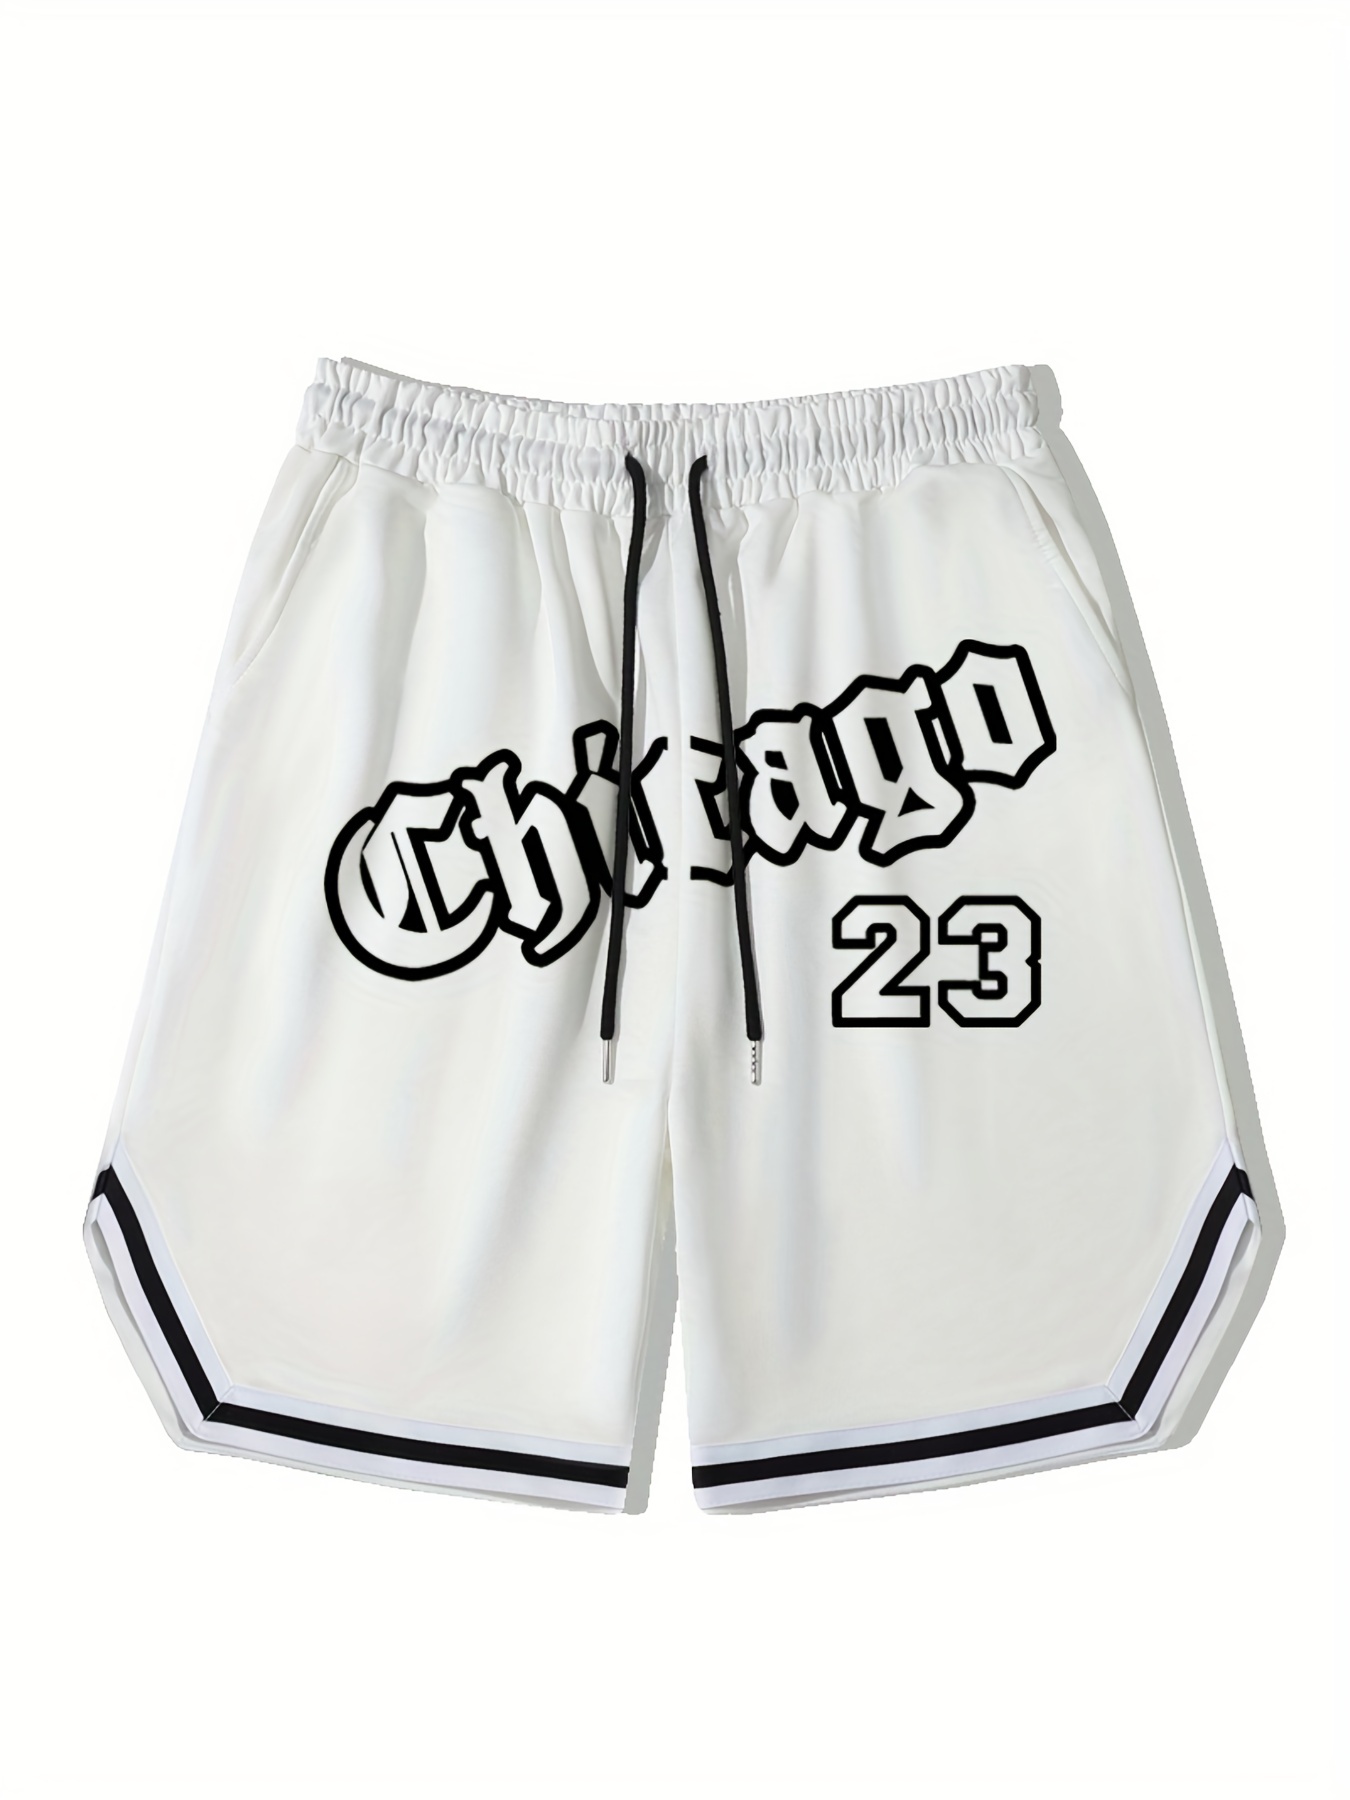 Mens Chicago 23 Print Basketball Shorts Casual Slightly Stretch Breathable  Drawstring Shorts Mens Clothing For Summer Outdoor, Check Out Today's  Deals Now